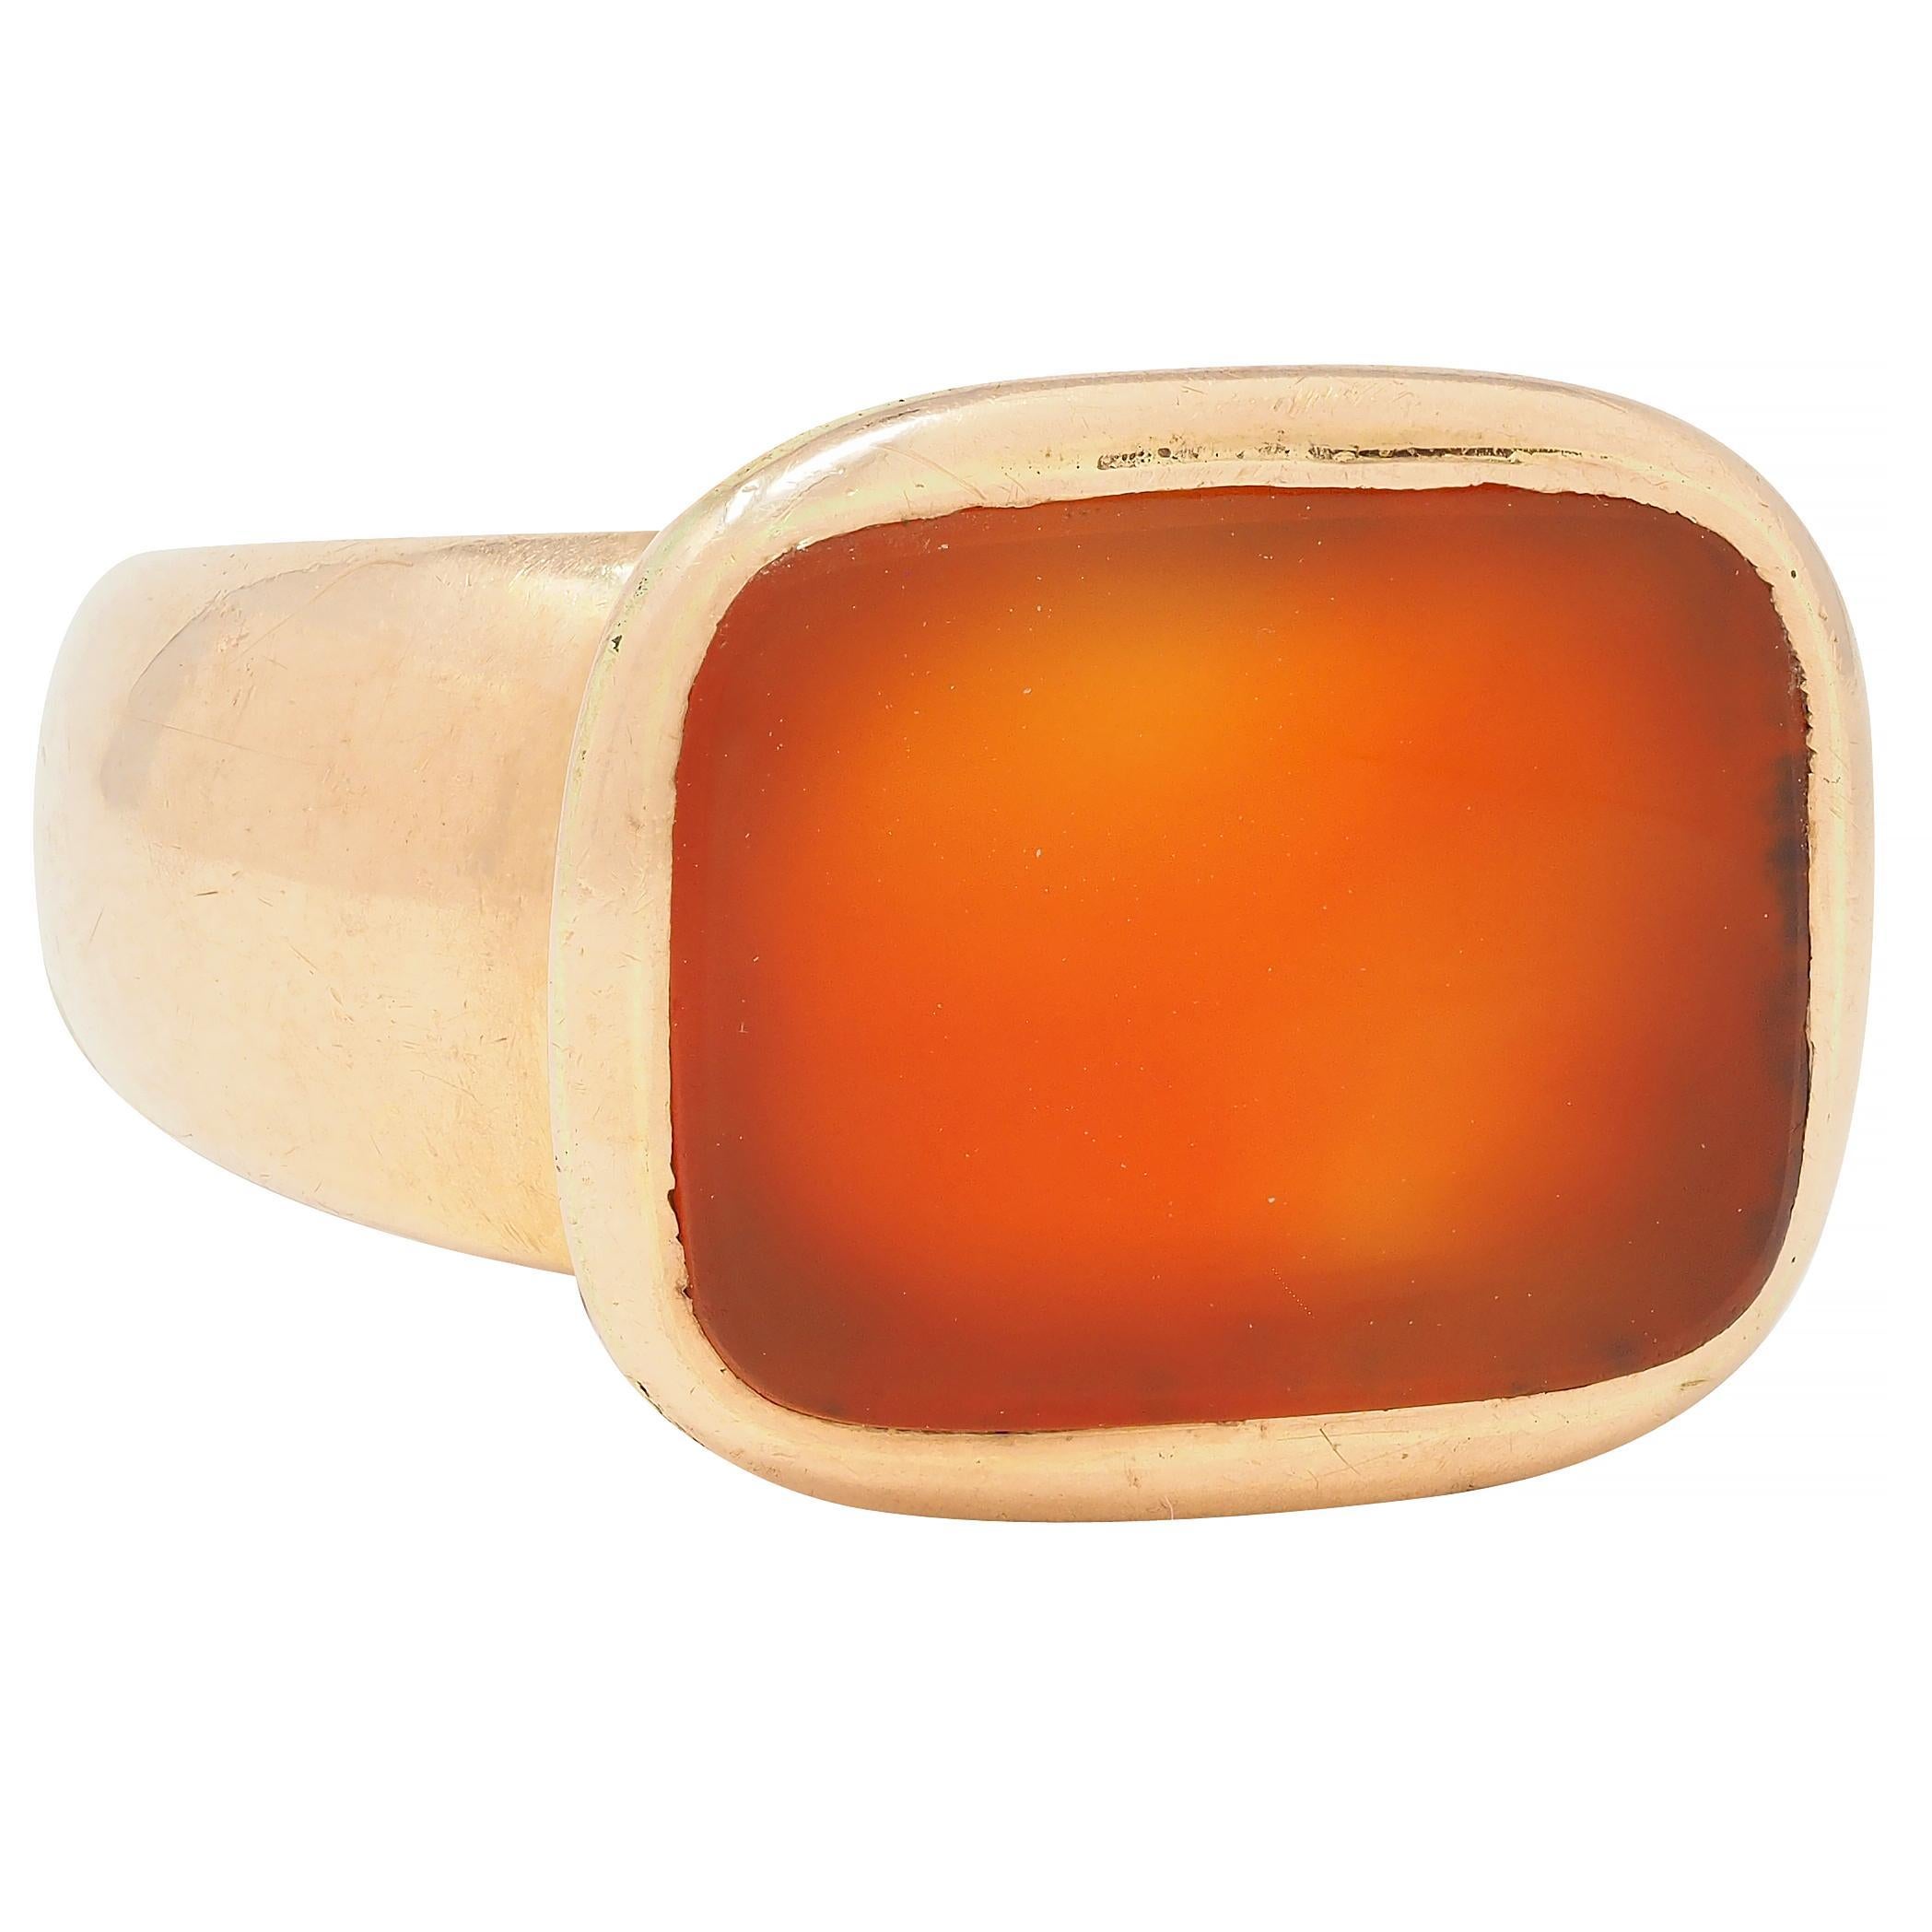 Centering a cushion-shaped carnelian tablet measuring 14.7 x 11.3 mm - translucent orangey-red
Flush set in a rose gold surround 
Completed by flared shoulders and tapered shank
Tested as 14 karat gold 
Circa: 1890s
Ring size: 8 3/4 and